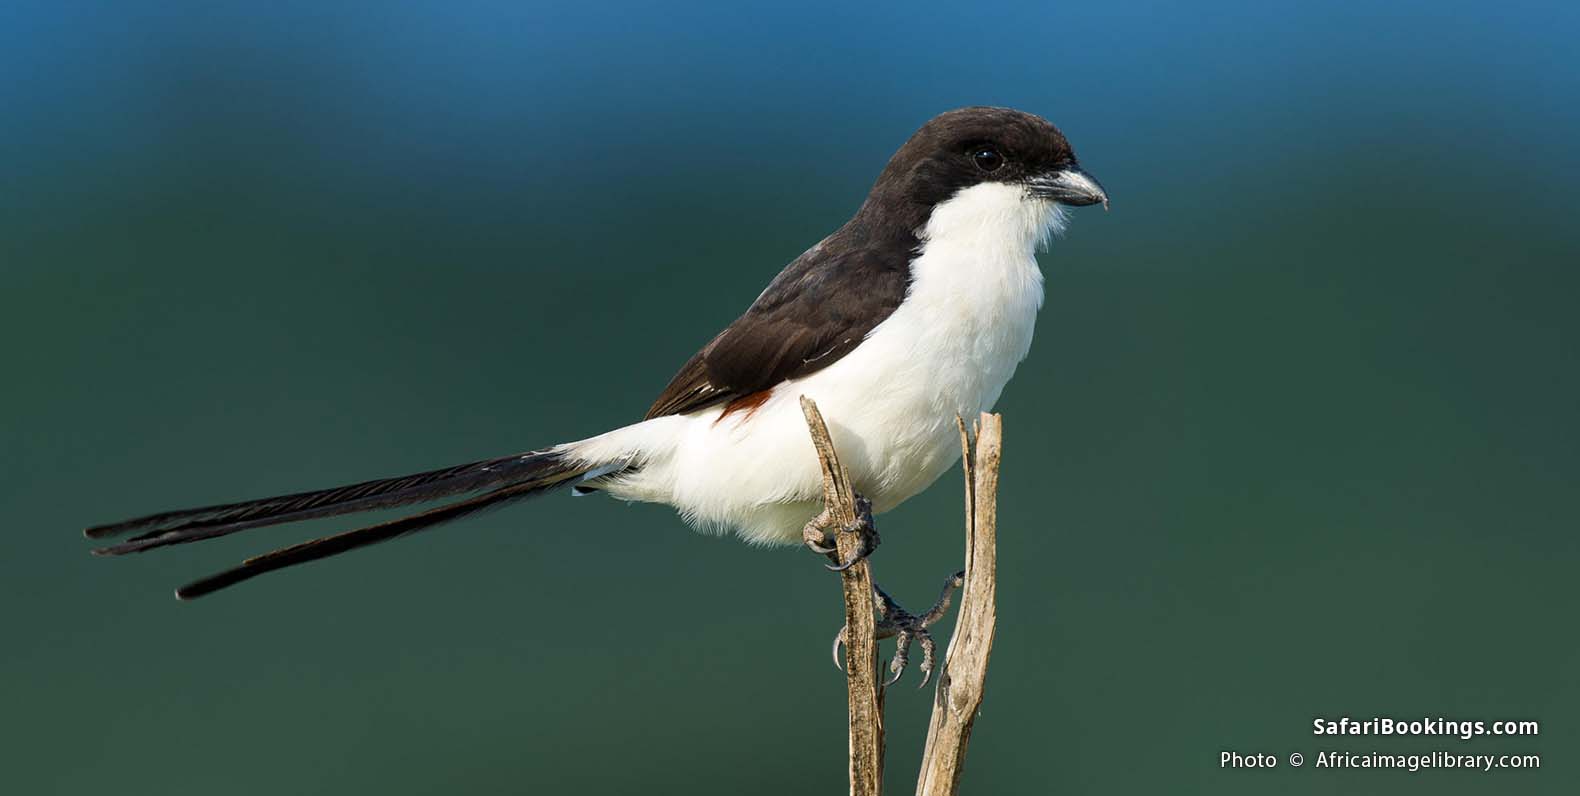 Long tailed fiscal at Taita Hills Wildlife Sanctuary